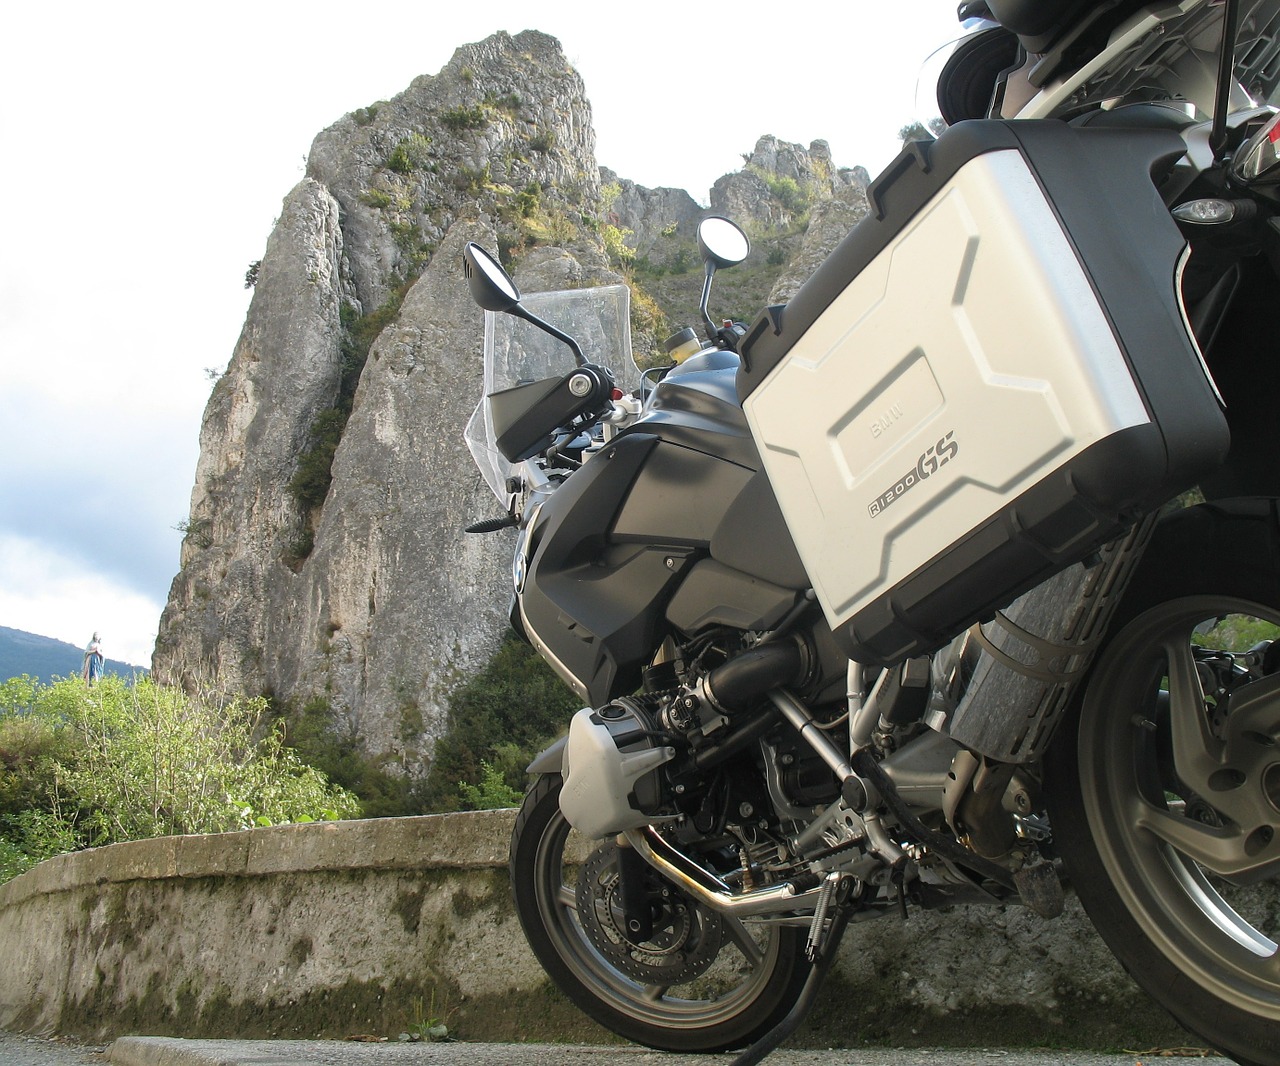 motorcycle bmw r1200gs free photo